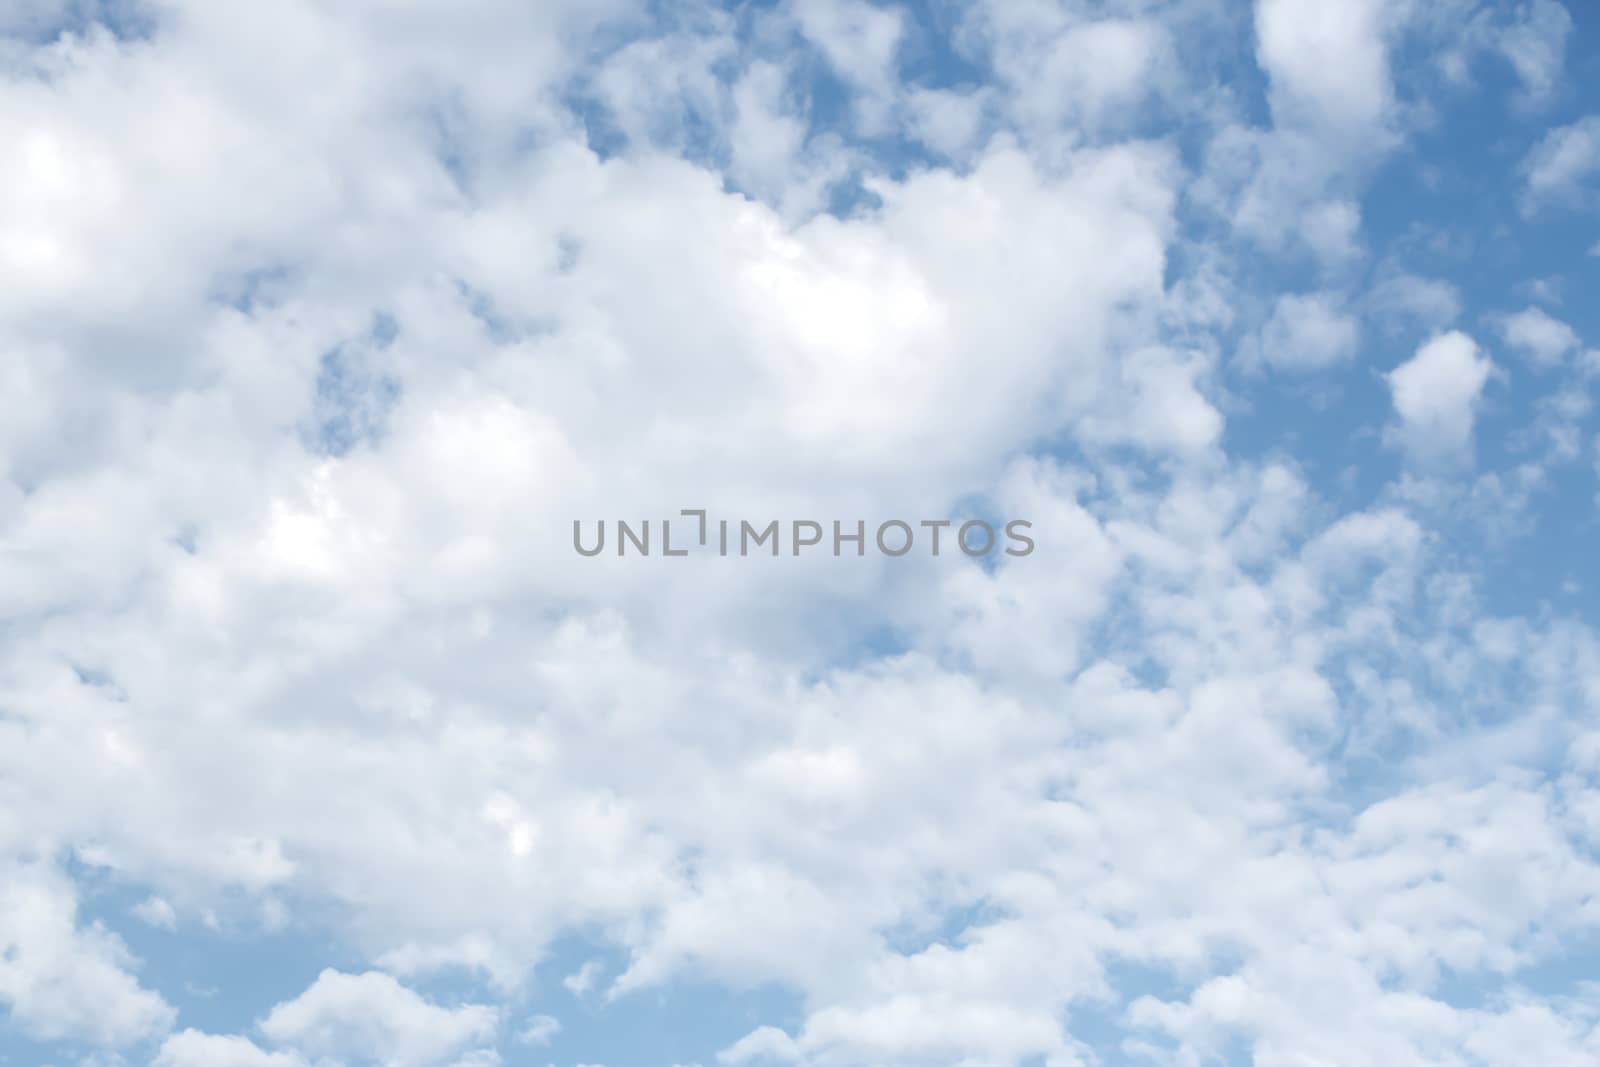 Clouds on the blue sky, texture or background by sandra_fotodesign